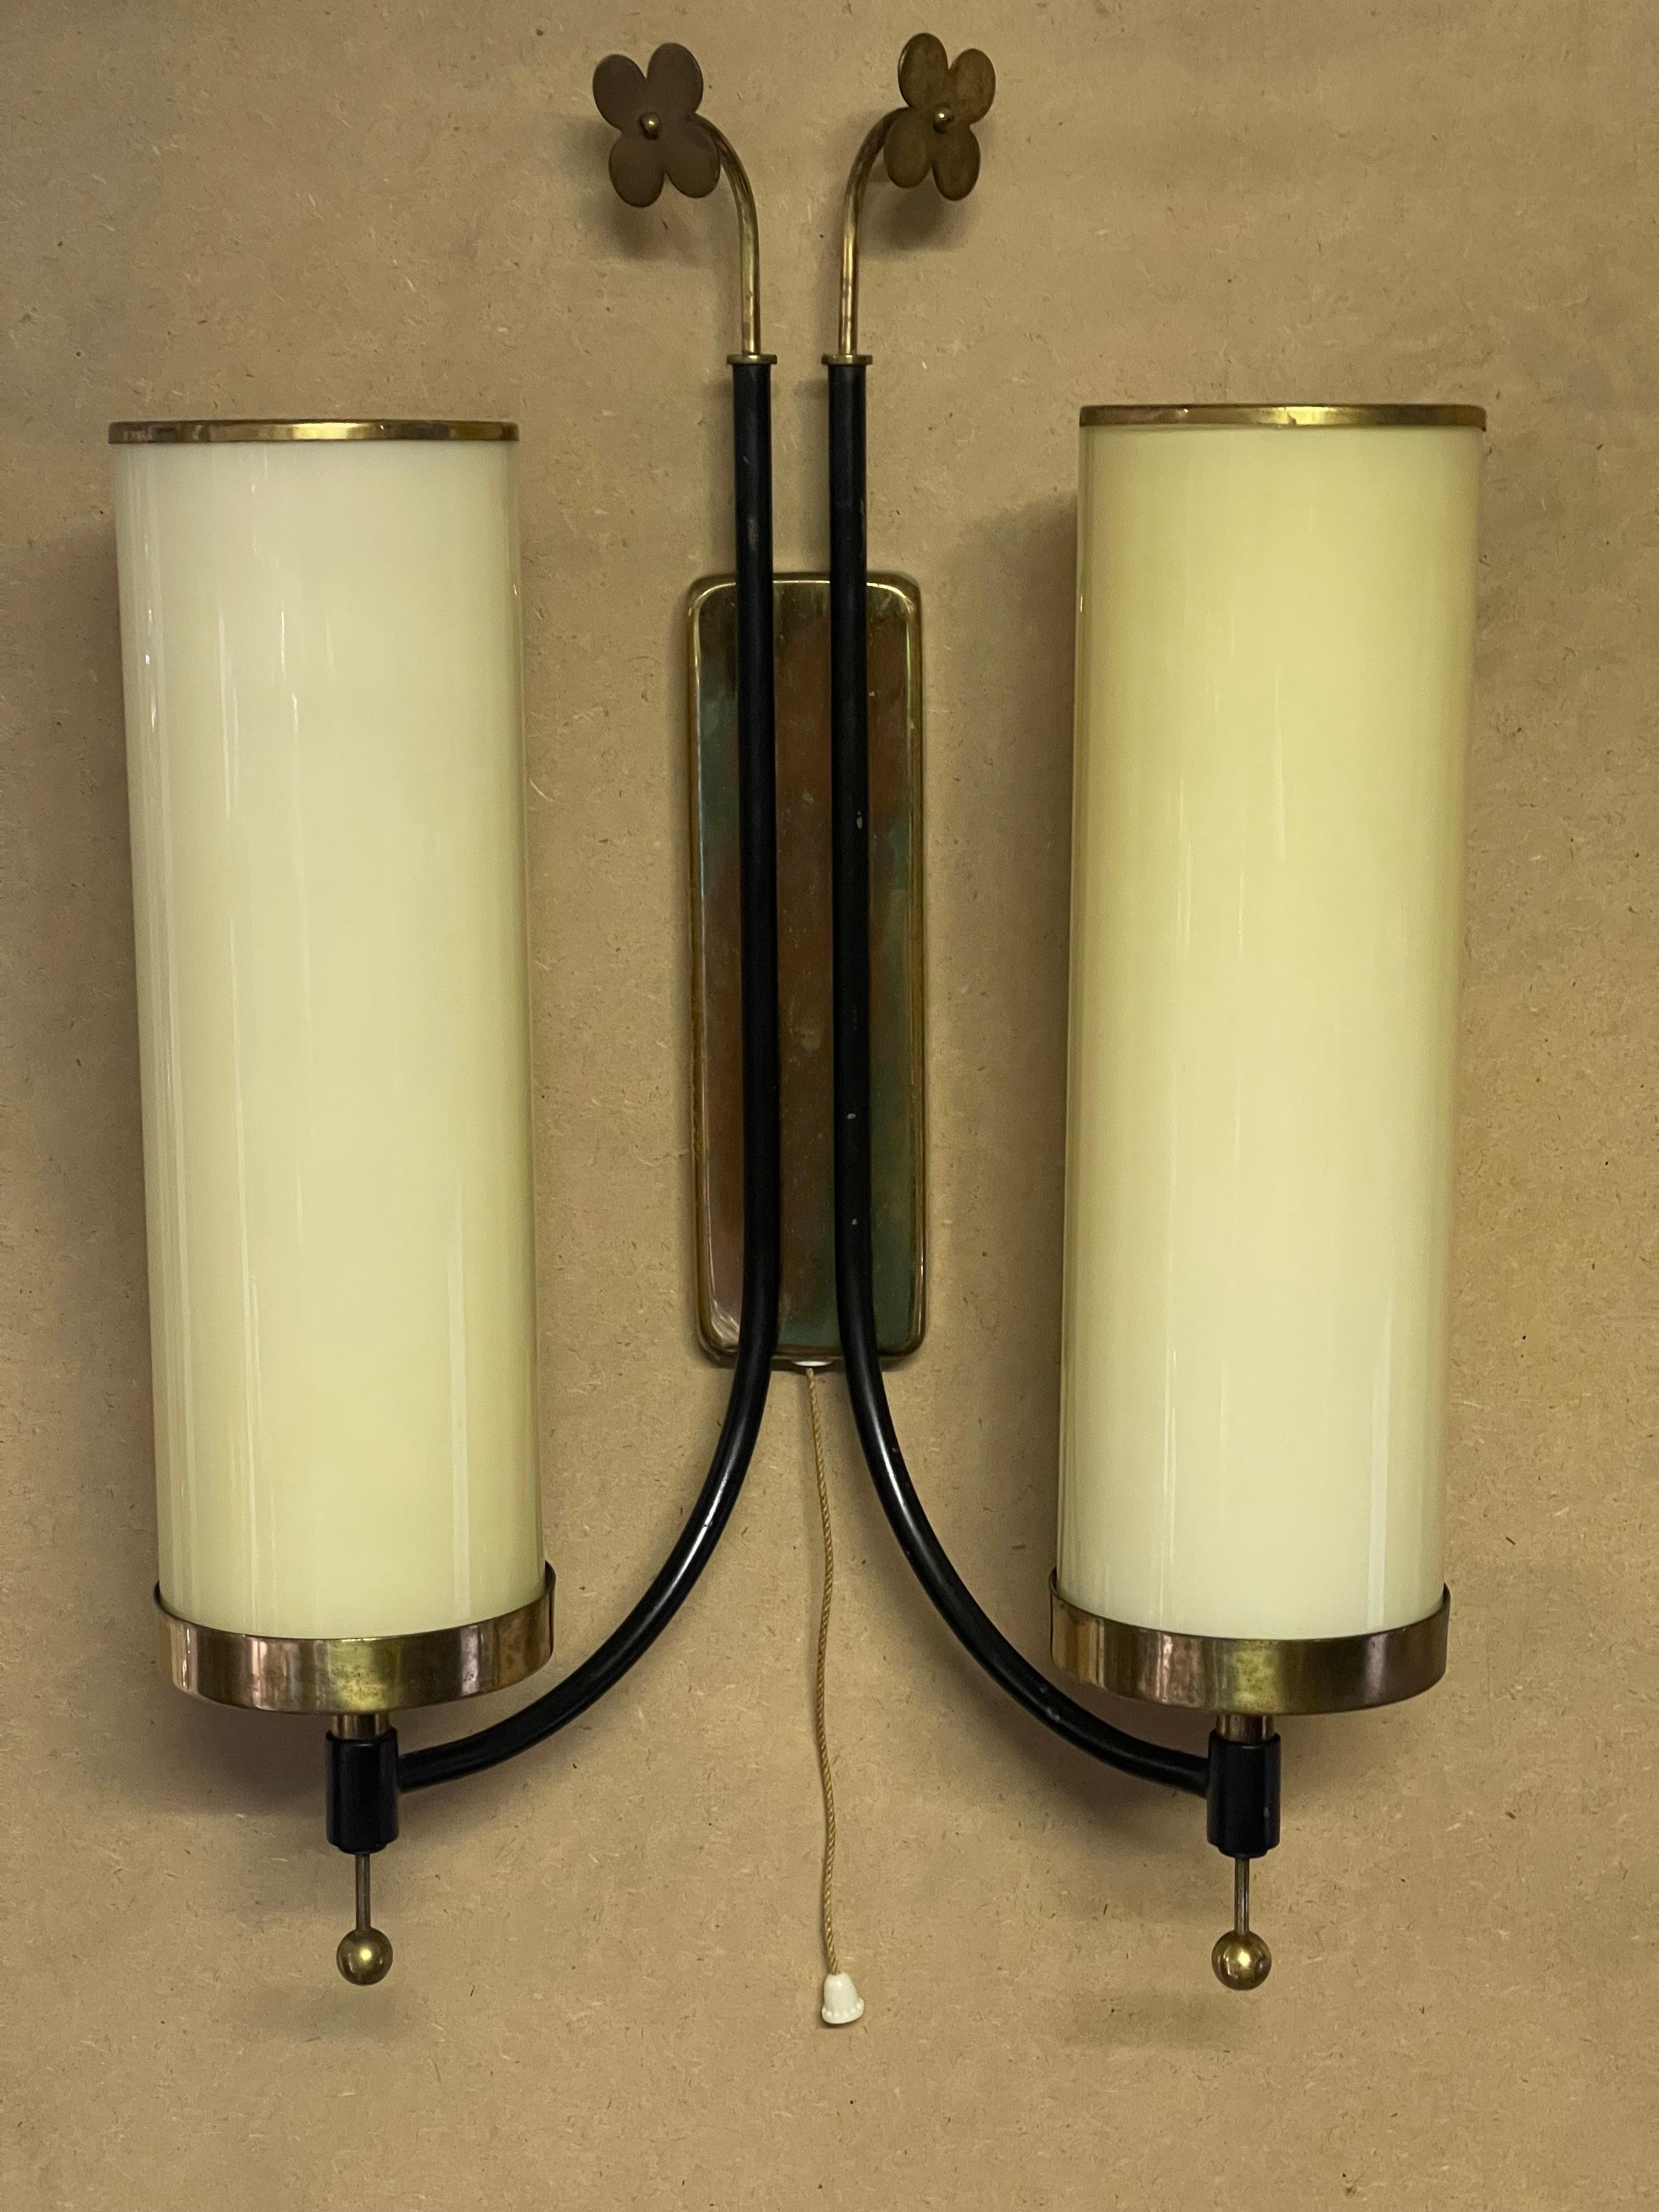 Pair of Scandinavian Tynell Style Opal Glass Tube and Brass Wall Sconces, 1940s For Sale 1